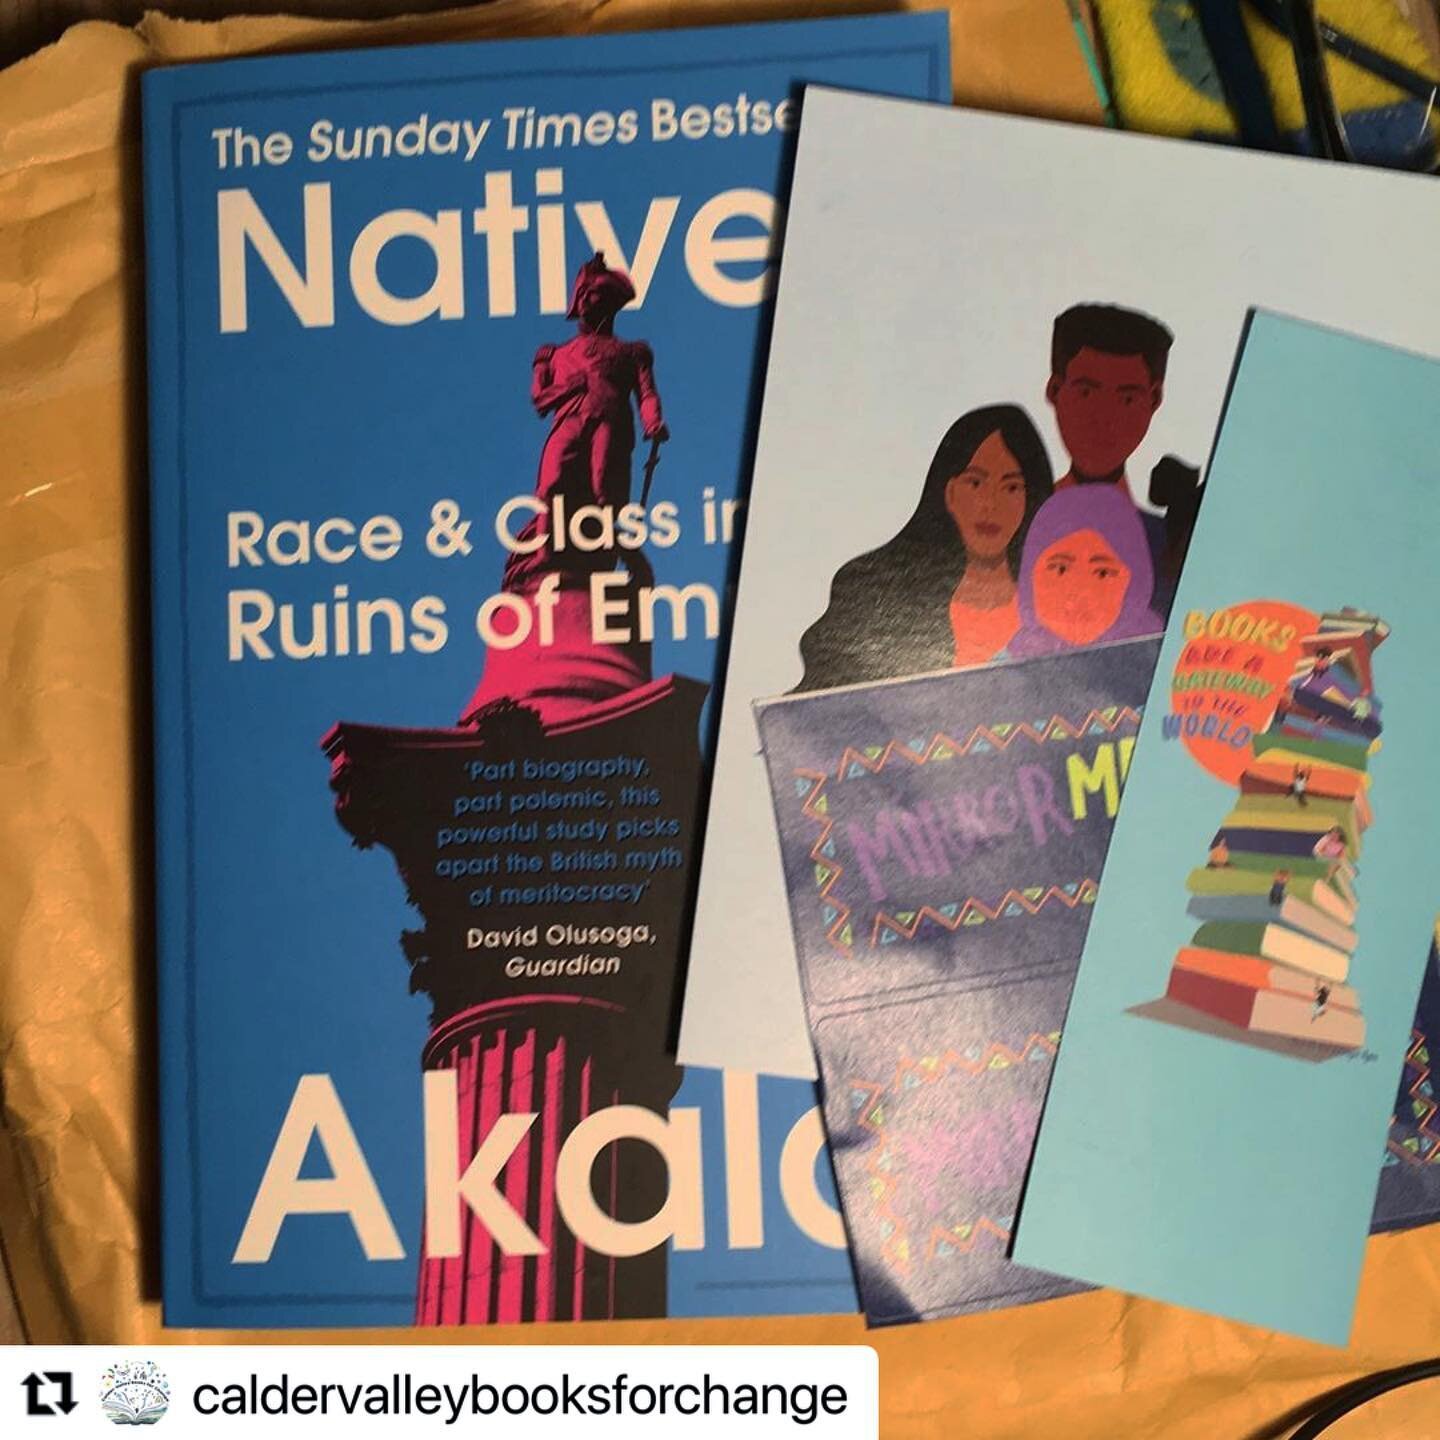 Thank you @caldervalleybooksforchange for the shout out. Please do check out the incredible work they are also doing, raising funds to provide the 60 #schools in their vicinity with a range of #diverse and #inclusive books. If you are able to make a 